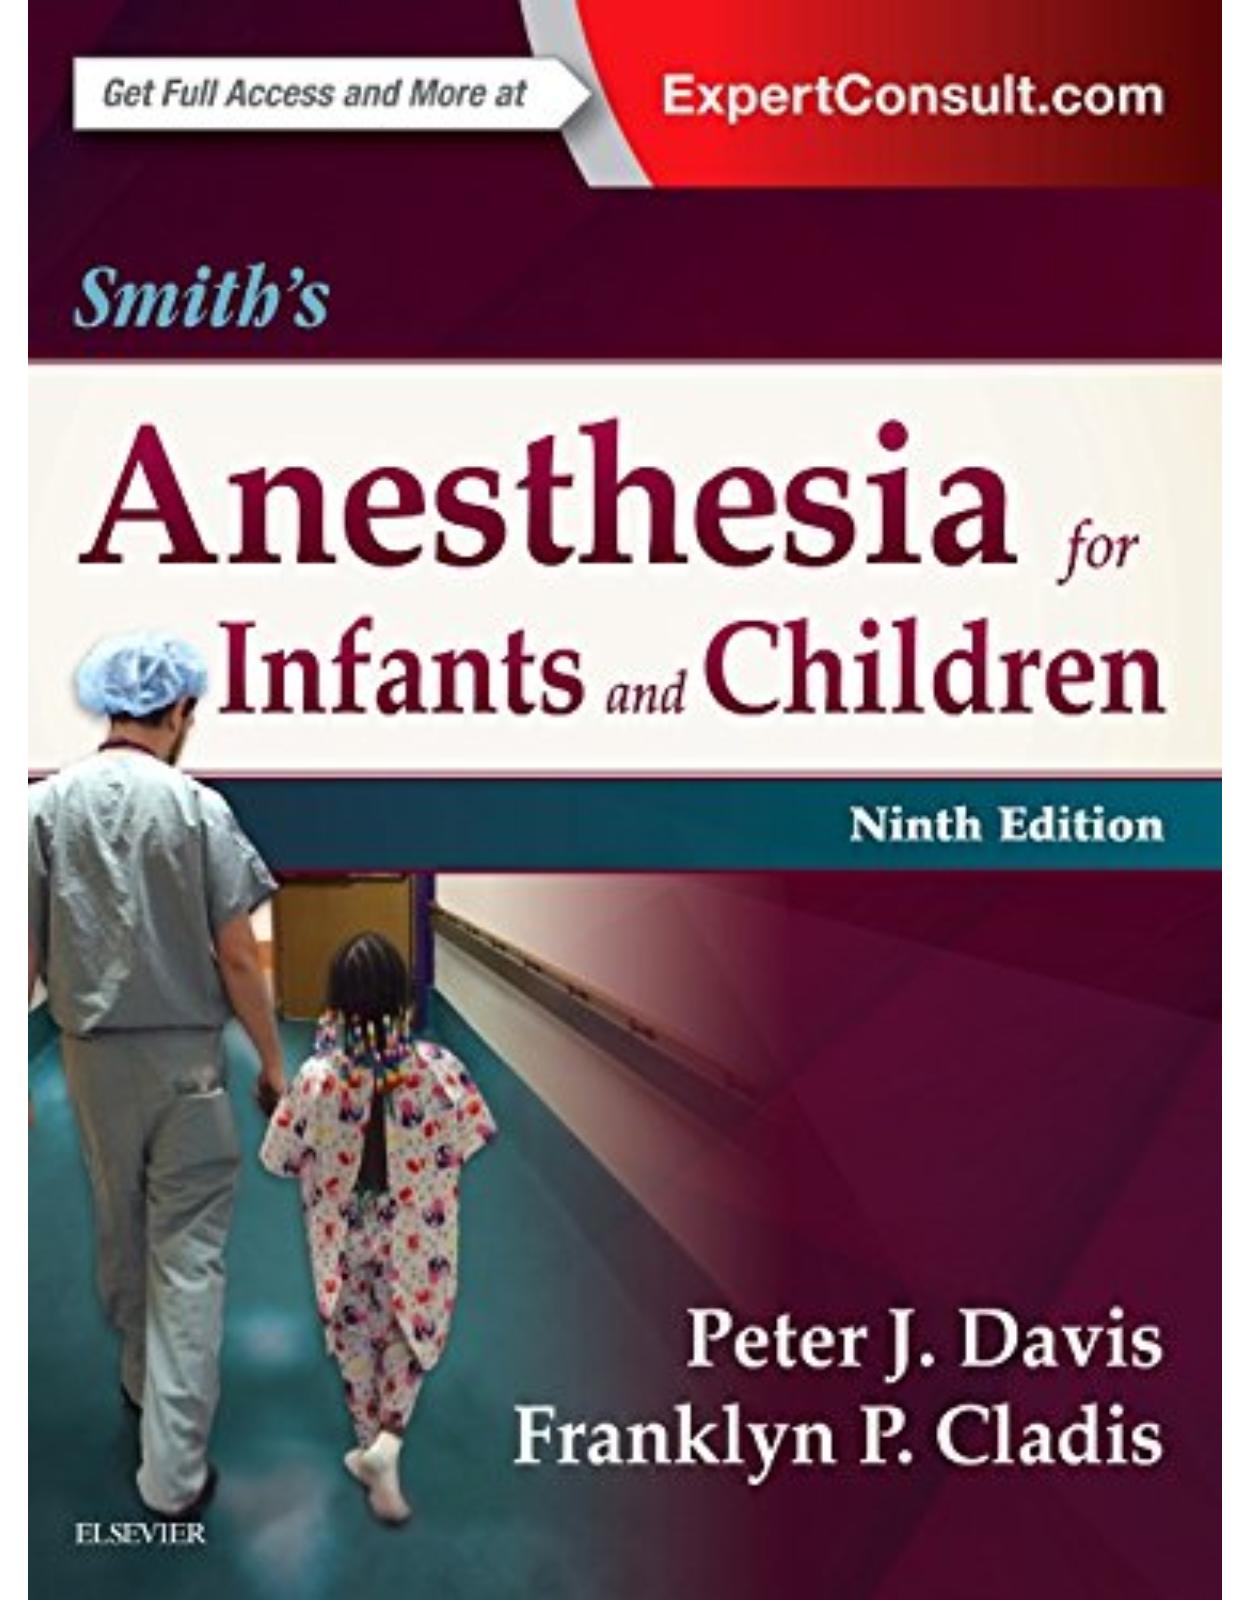 Smith s Anesthesia for Infants and Children, 9th Edition